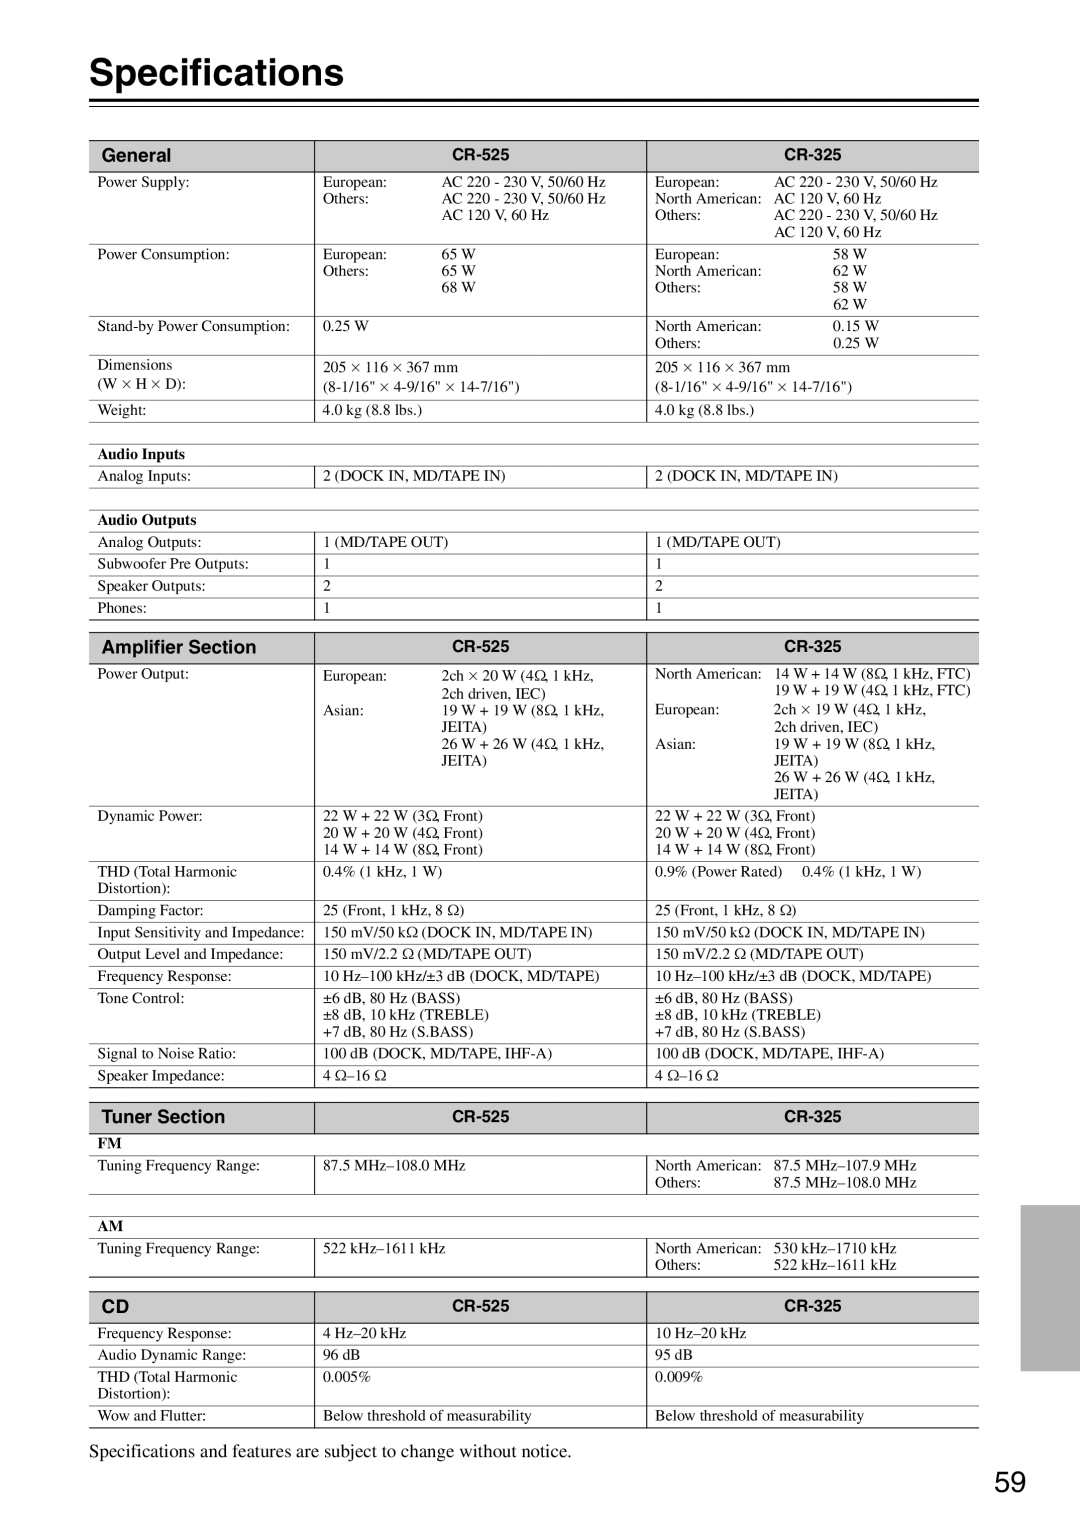 Onkyo CR-525 instruction manual Specifications, CR-325, Audio Inputs, Audio Outputs 